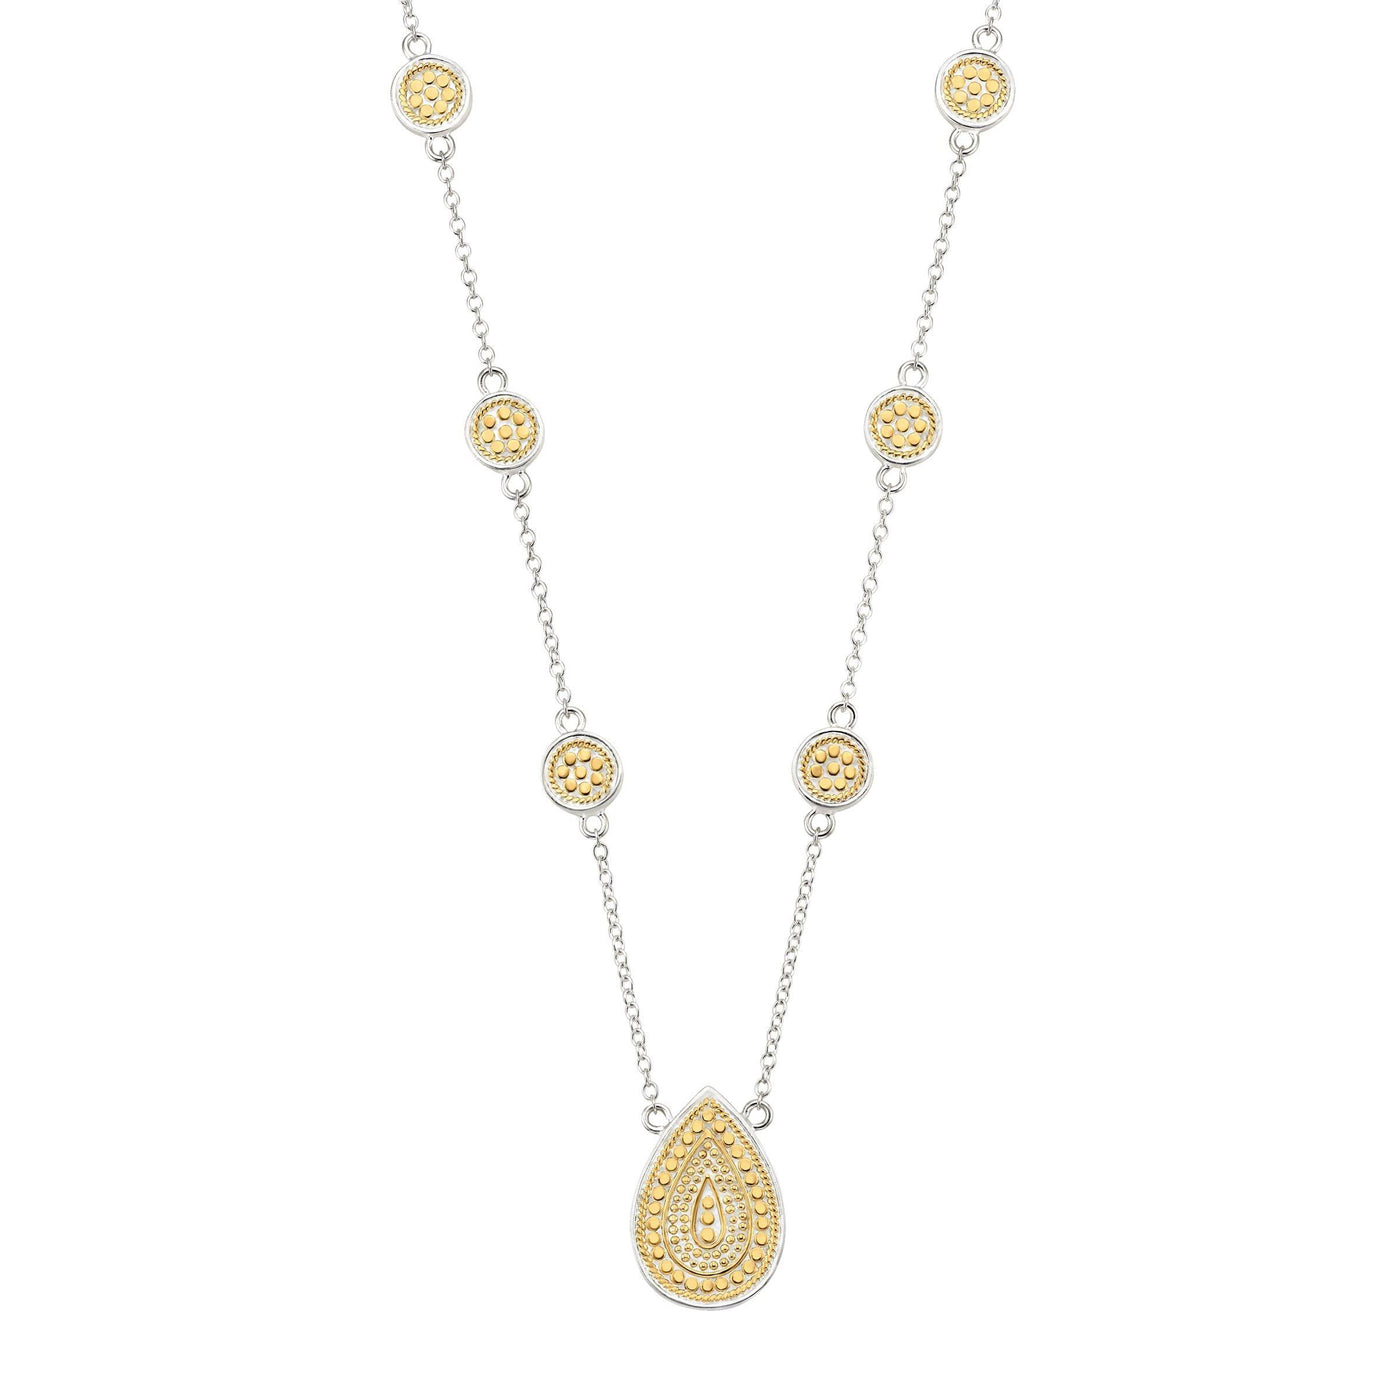 Anna Beck Gold and Silver Signature Teardrop Necklace